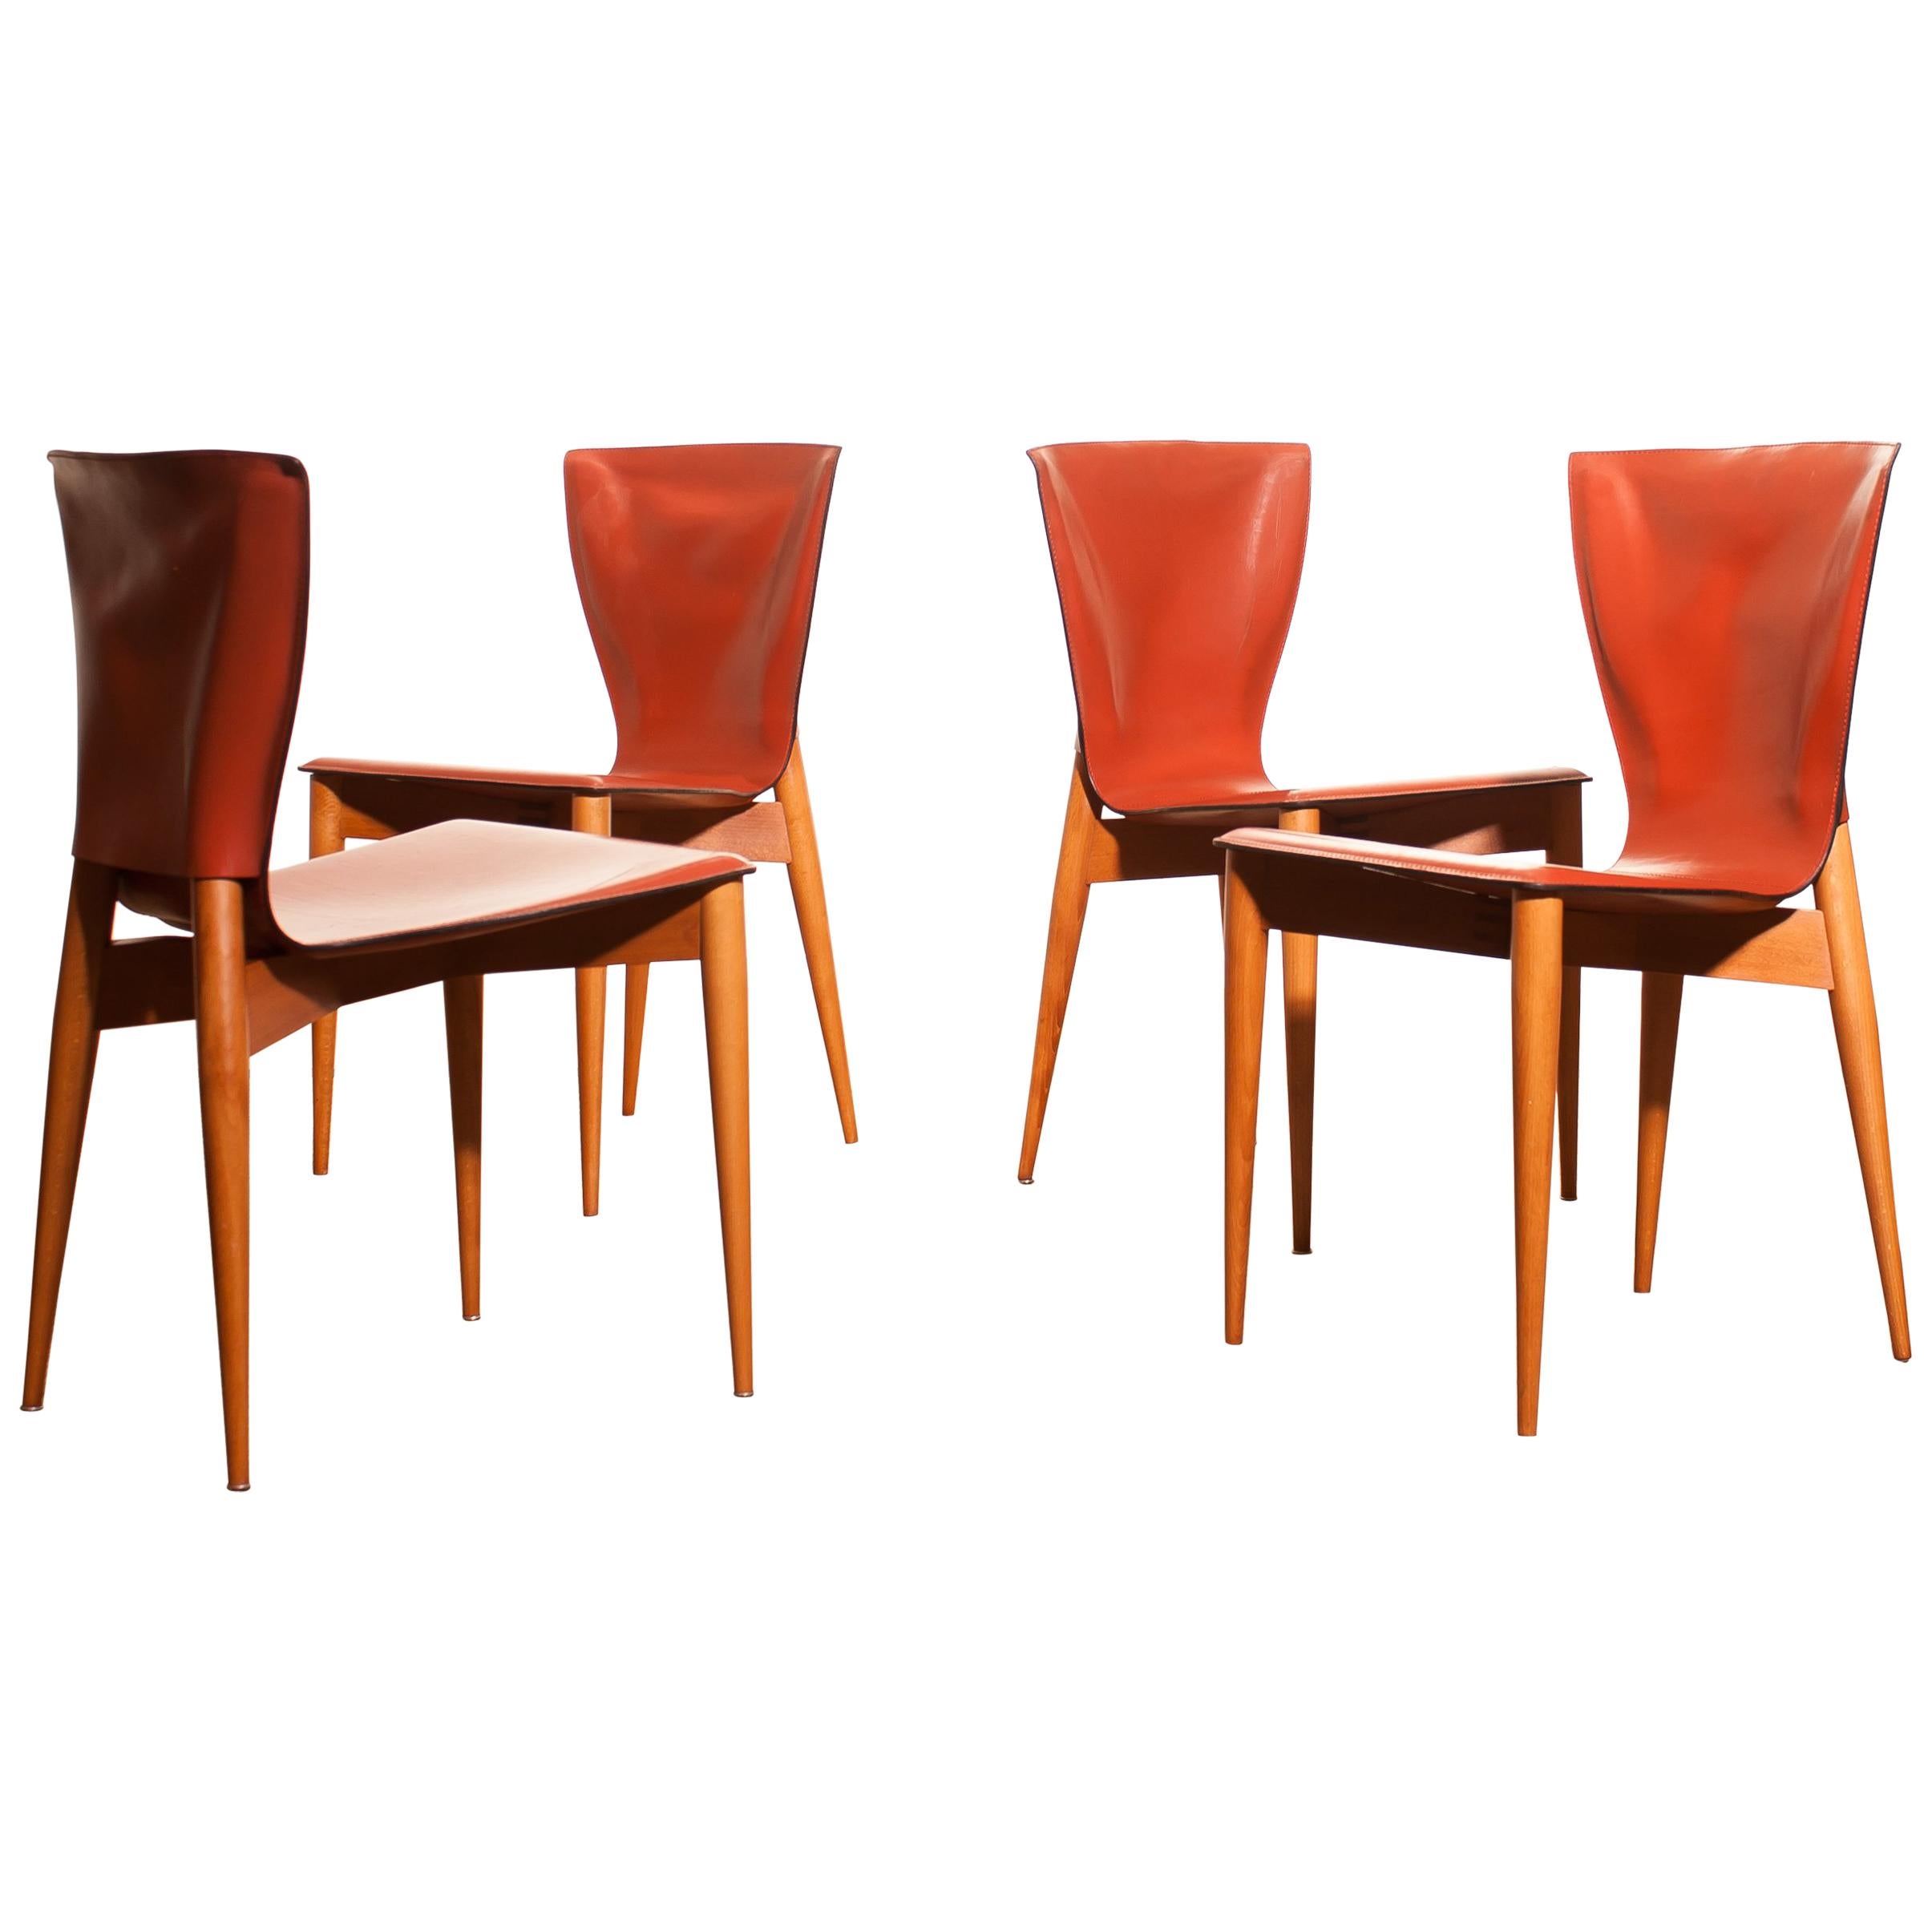 1970s, Set of Four Carlo Bartoli for Matteo Grassi 'Vela' Dining Side Chairs